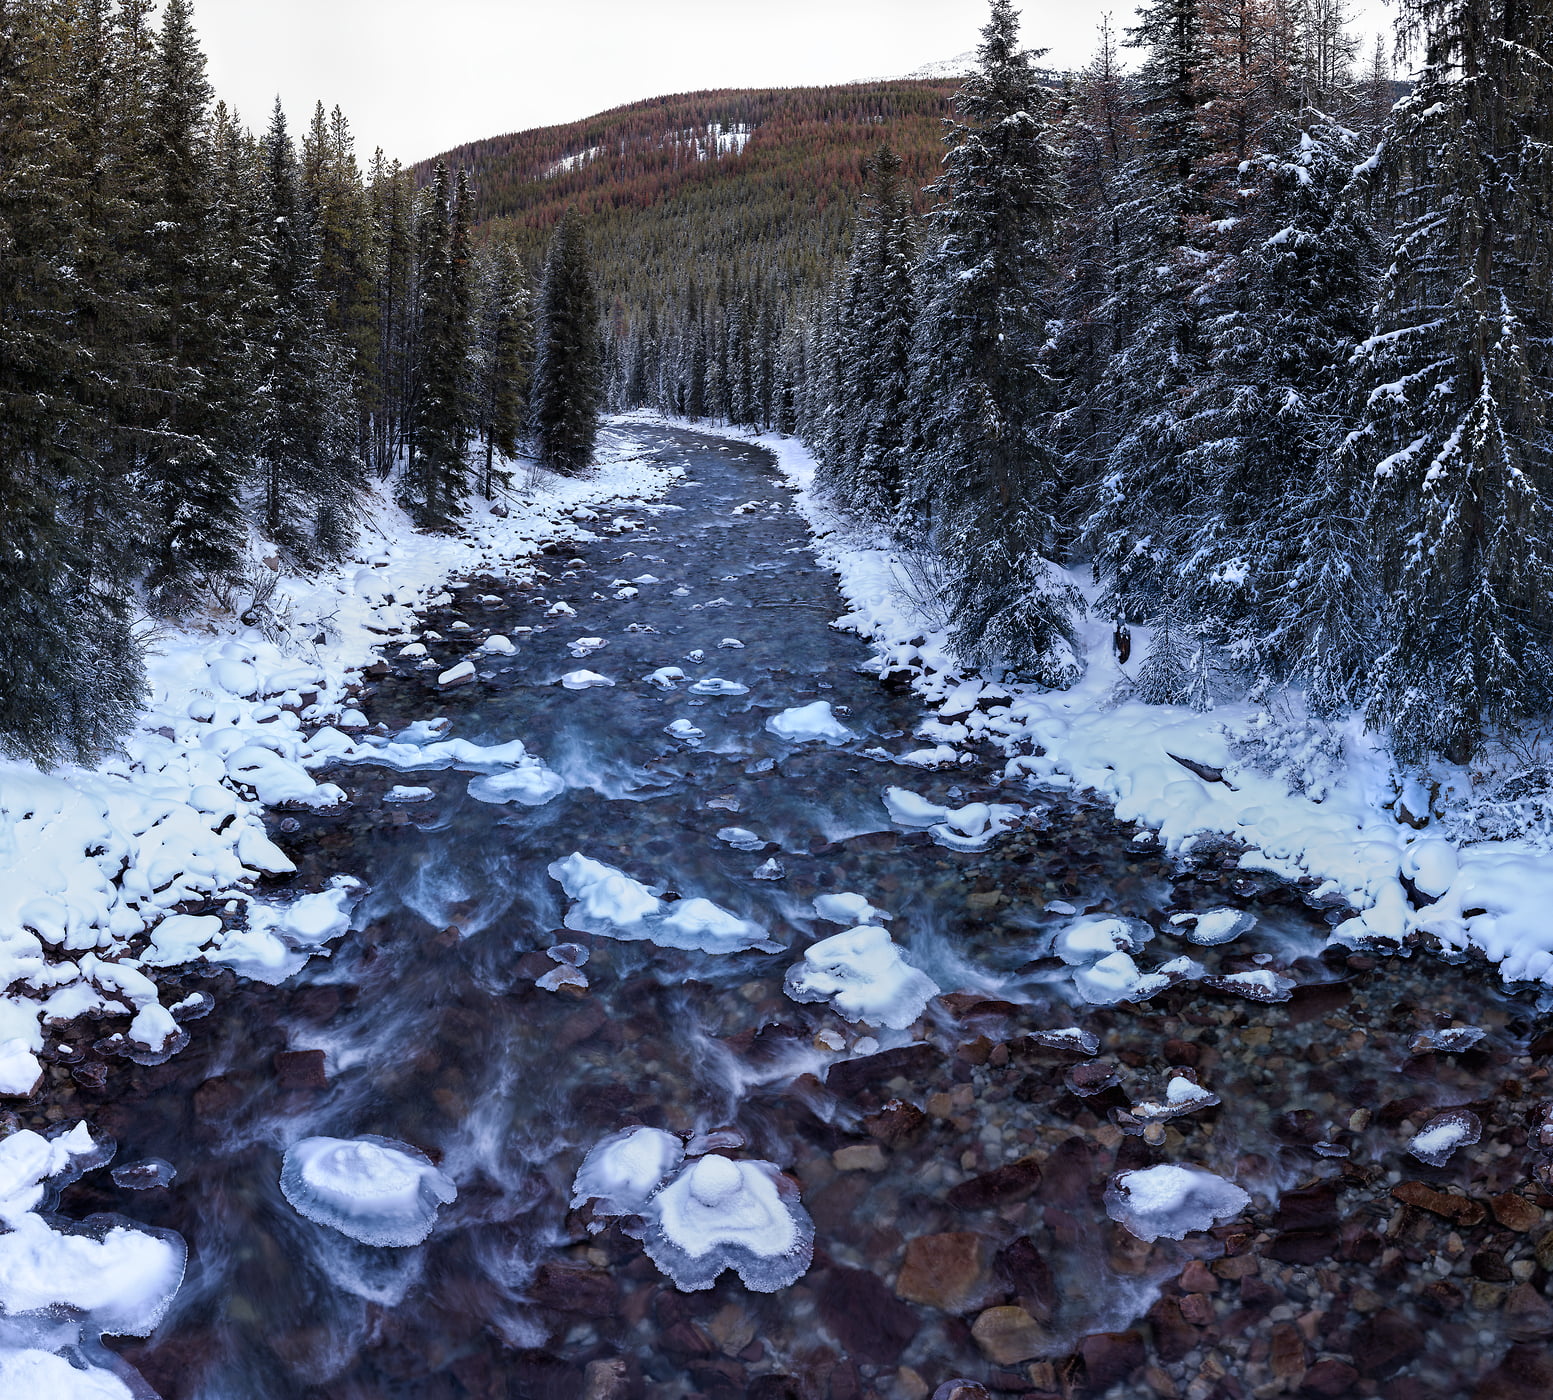 2,578 megapixels! A very high resolution, large-format VAST photo print of a river in winter with snow and evergreen trees; nature photograph created by Scott Dimond in Jasper National Park, Alberta, Canada